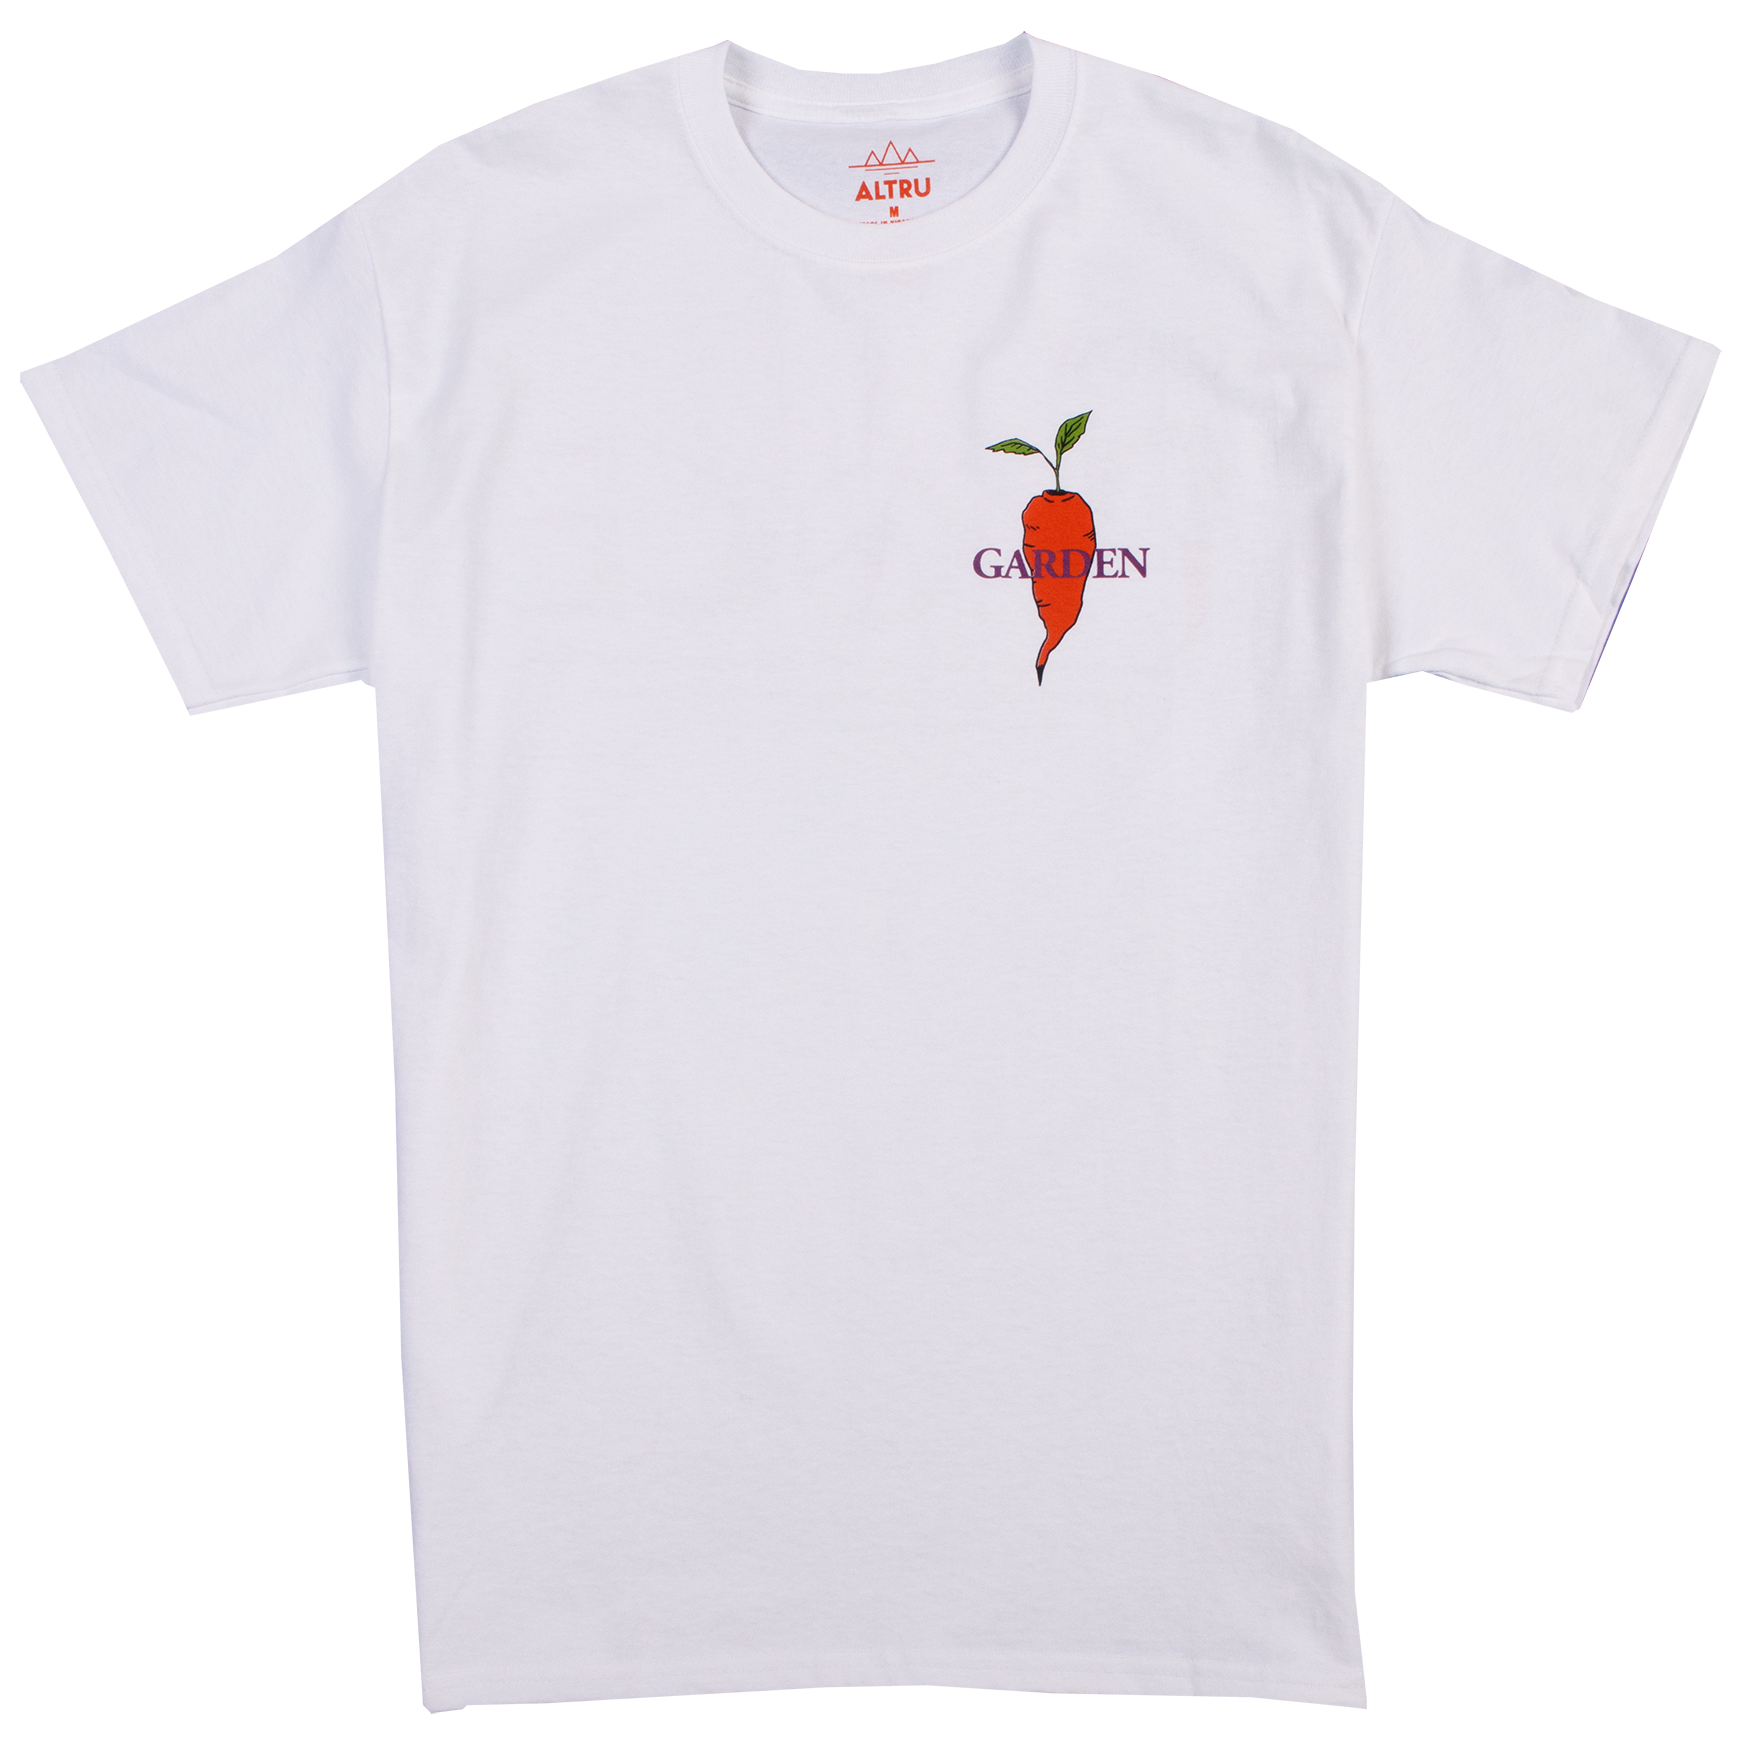 Garden graphic tee printed on front and back